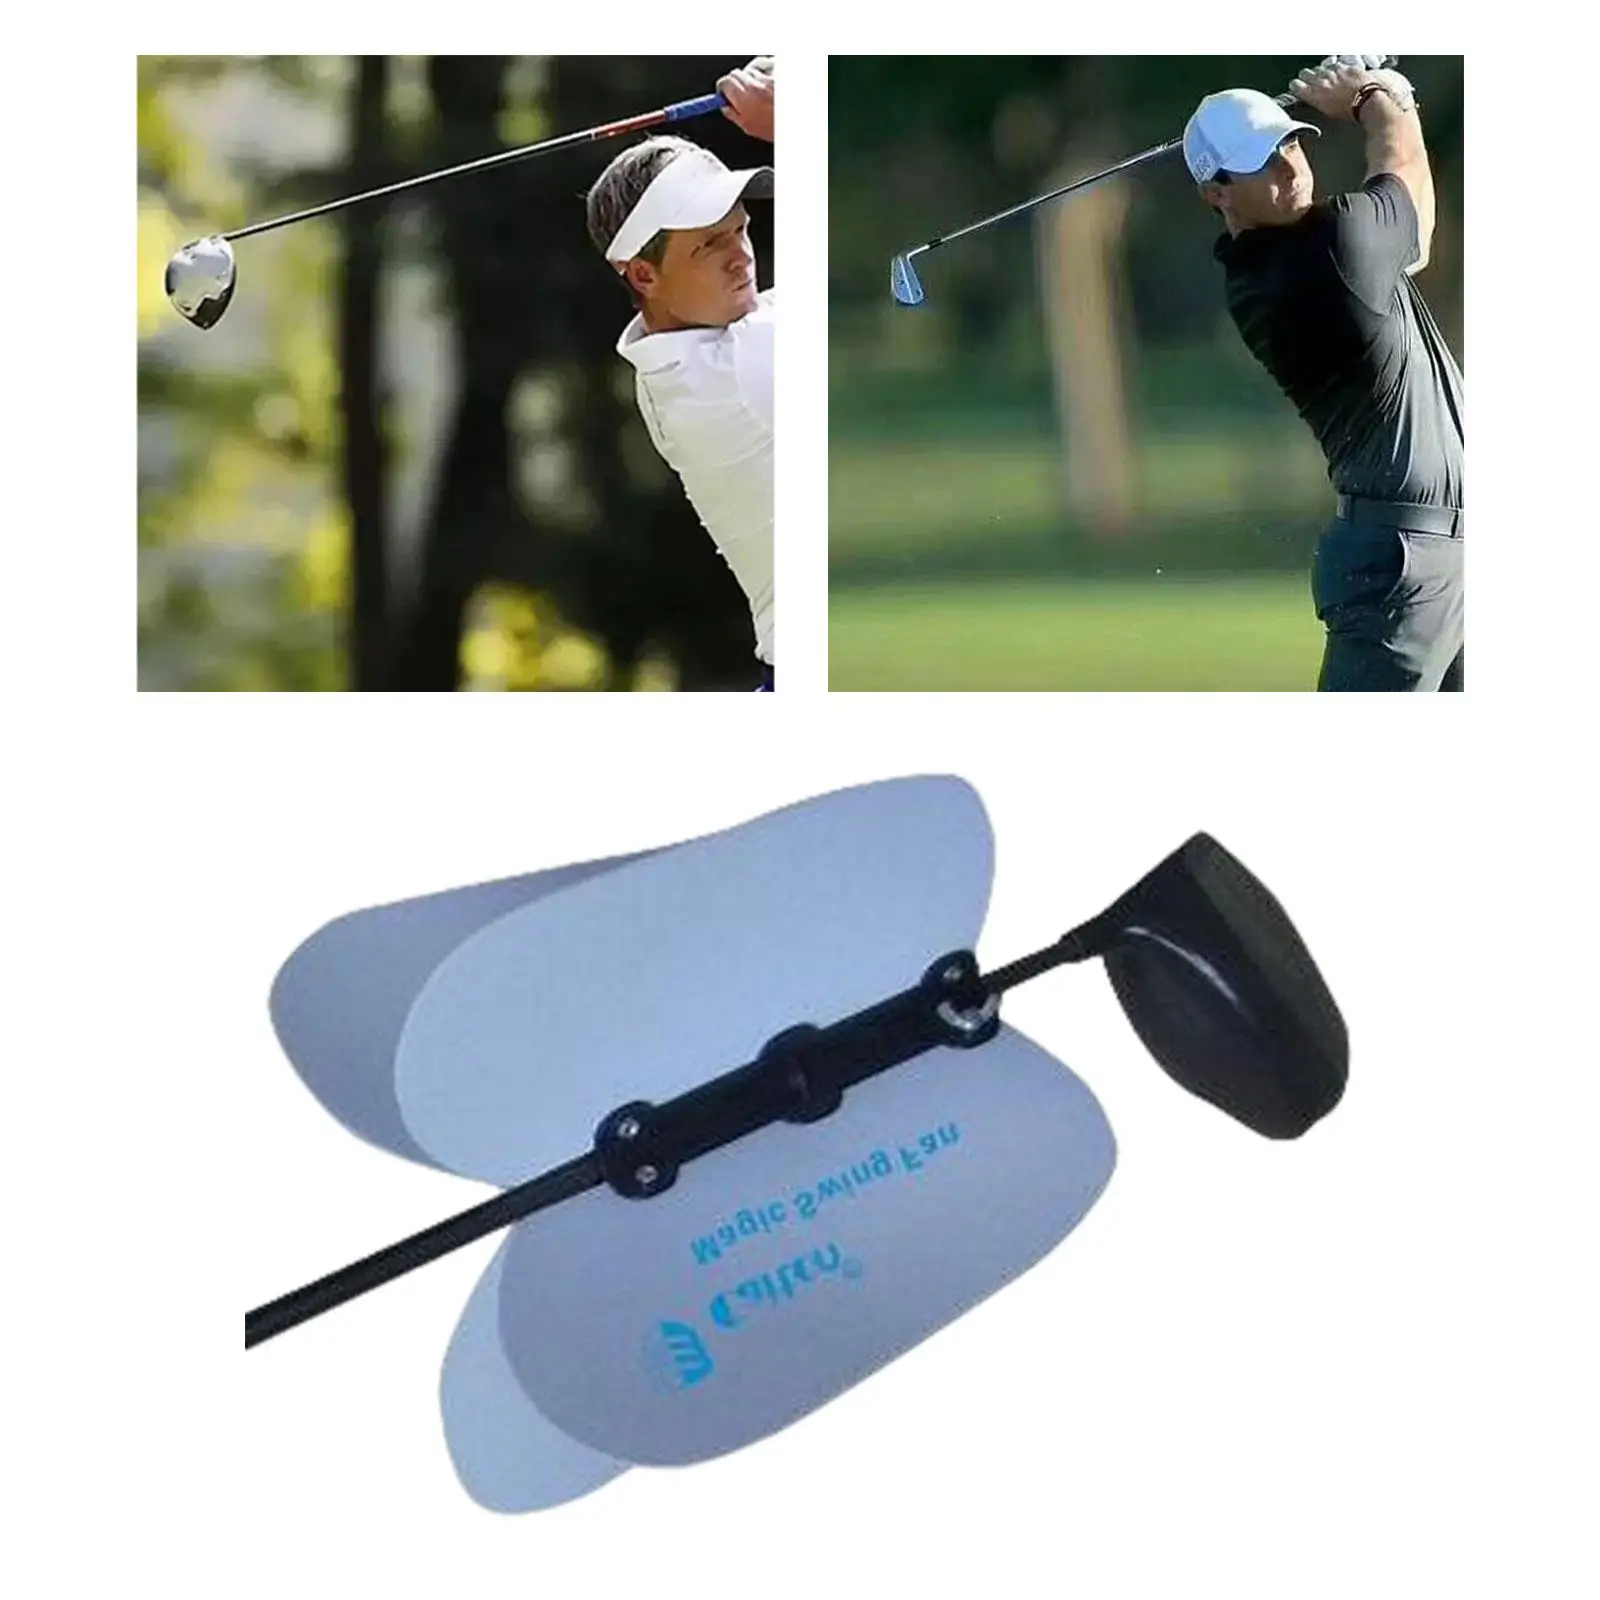 Golf Swing Fan Wind Resistance Equipment Trainer for Golfers of All Skill Levels